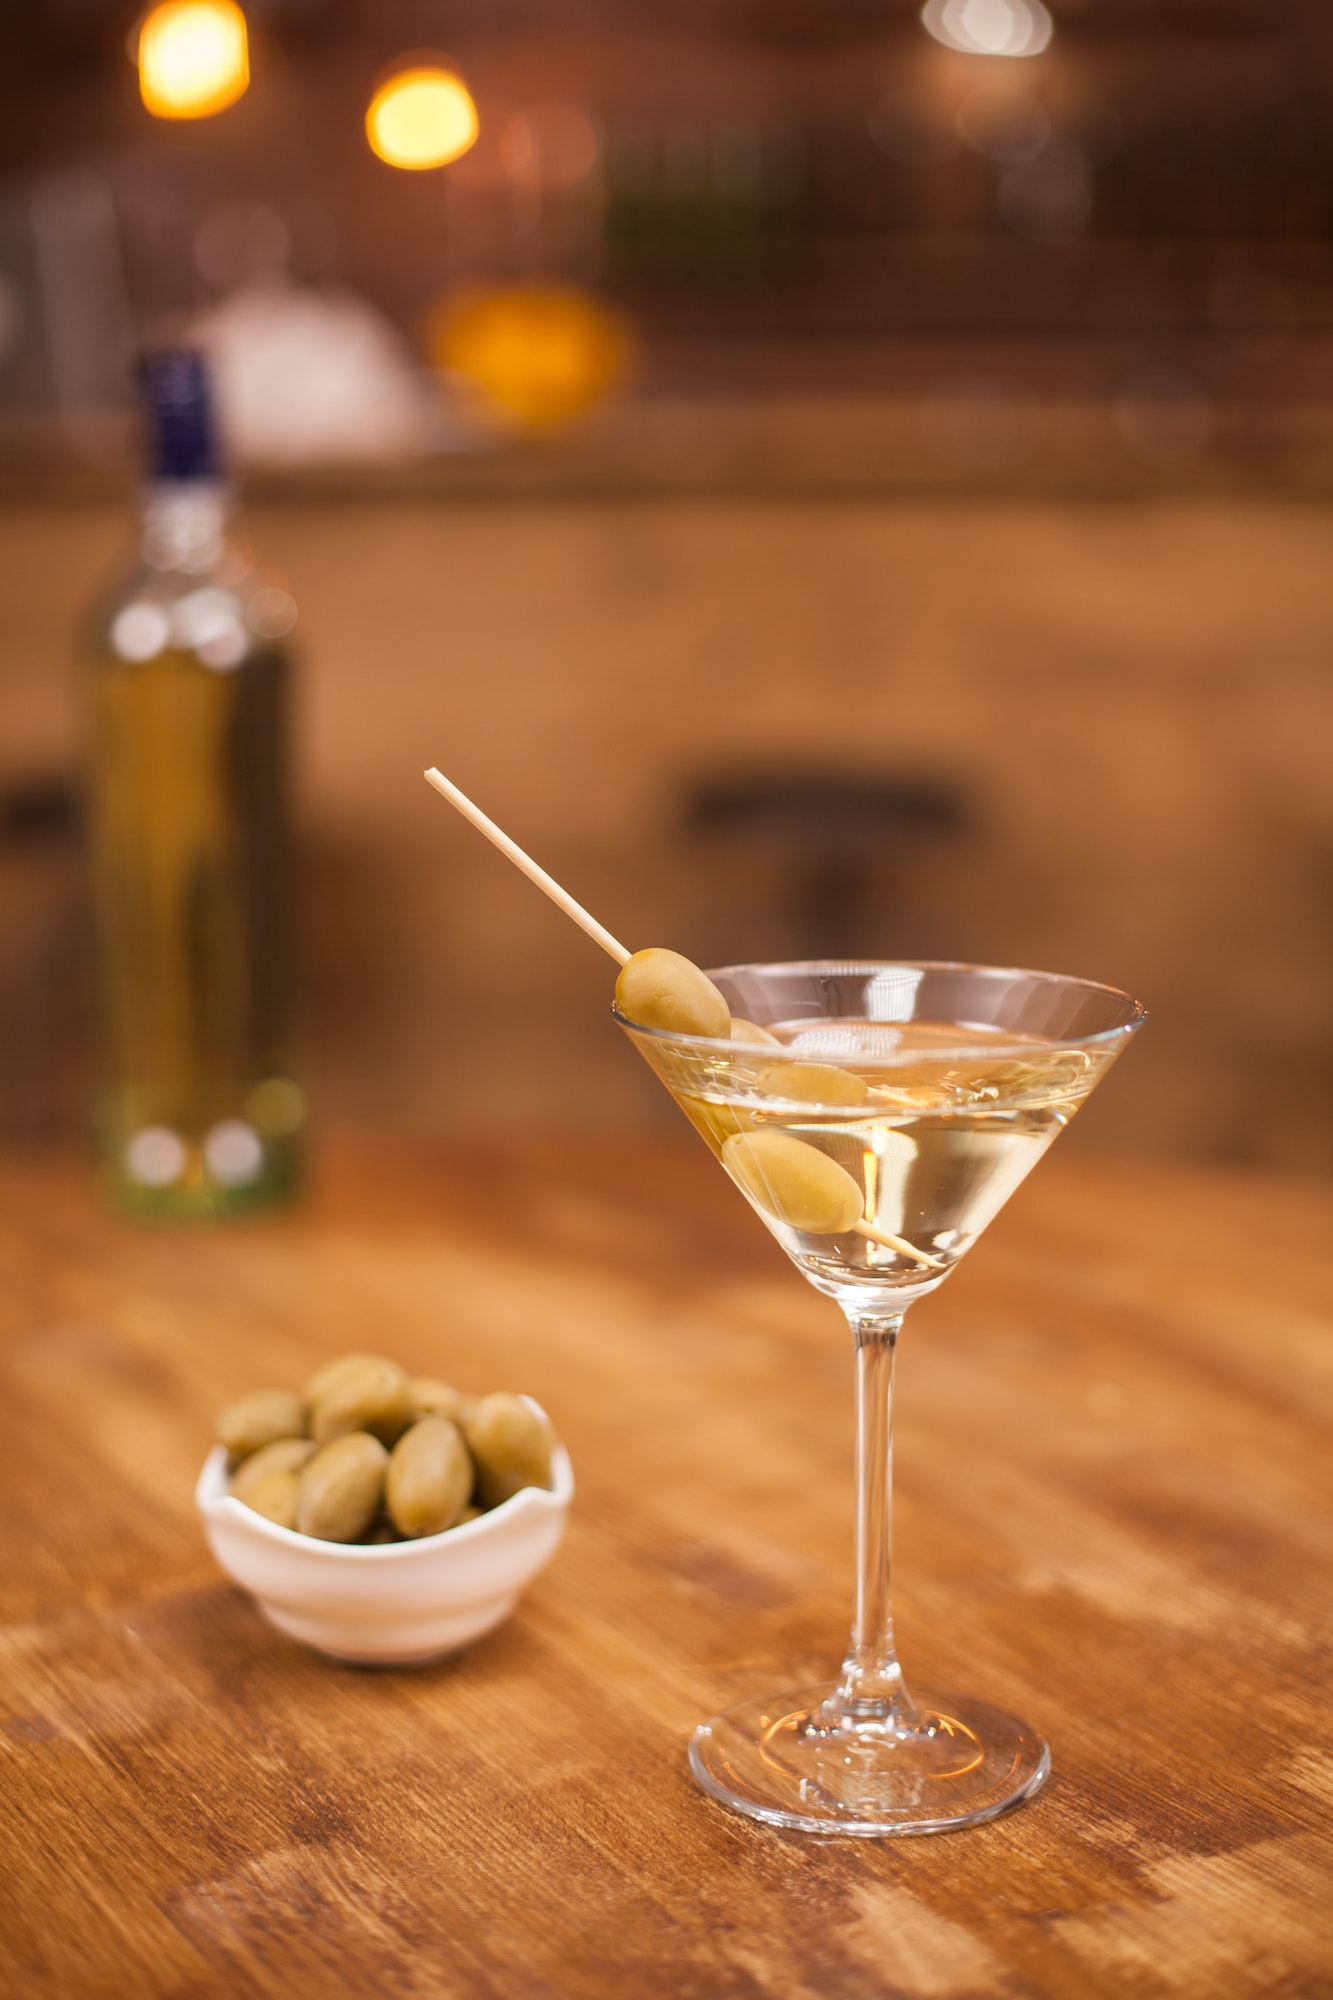 Celebration with a glass of white martini and olives in a restaurant at the bar counter